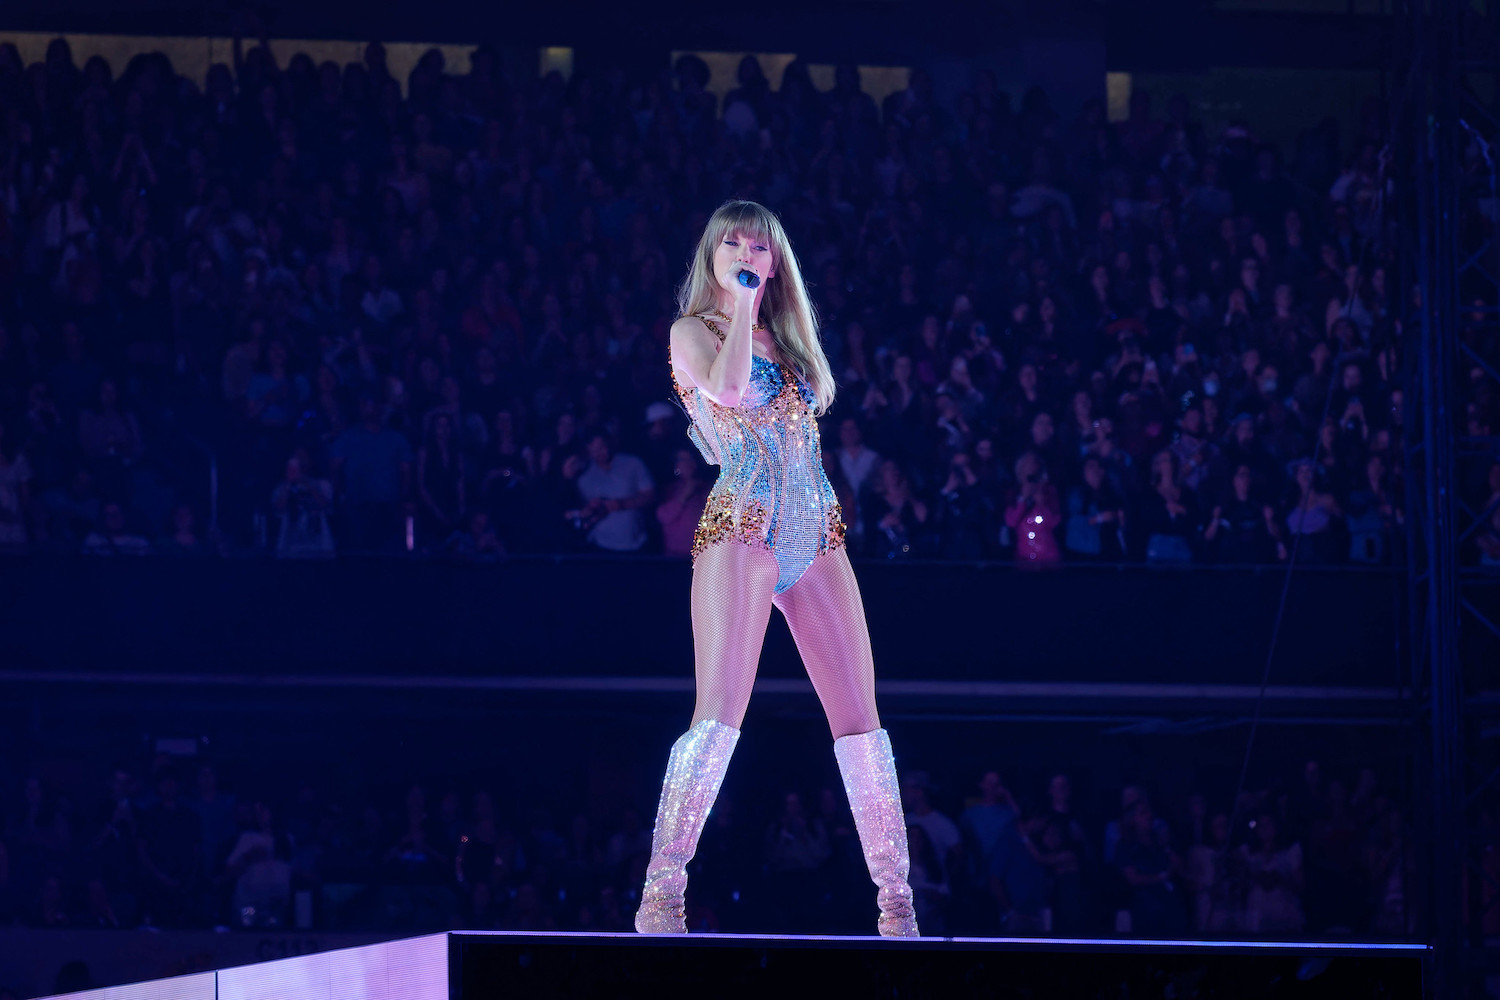 Taylor Swift performs at her widely anticipated “Eras Tour” on March 2, 2023 in Arlington, Texas. The “Eras Tour” broke the record for the highest attended female act of all time.